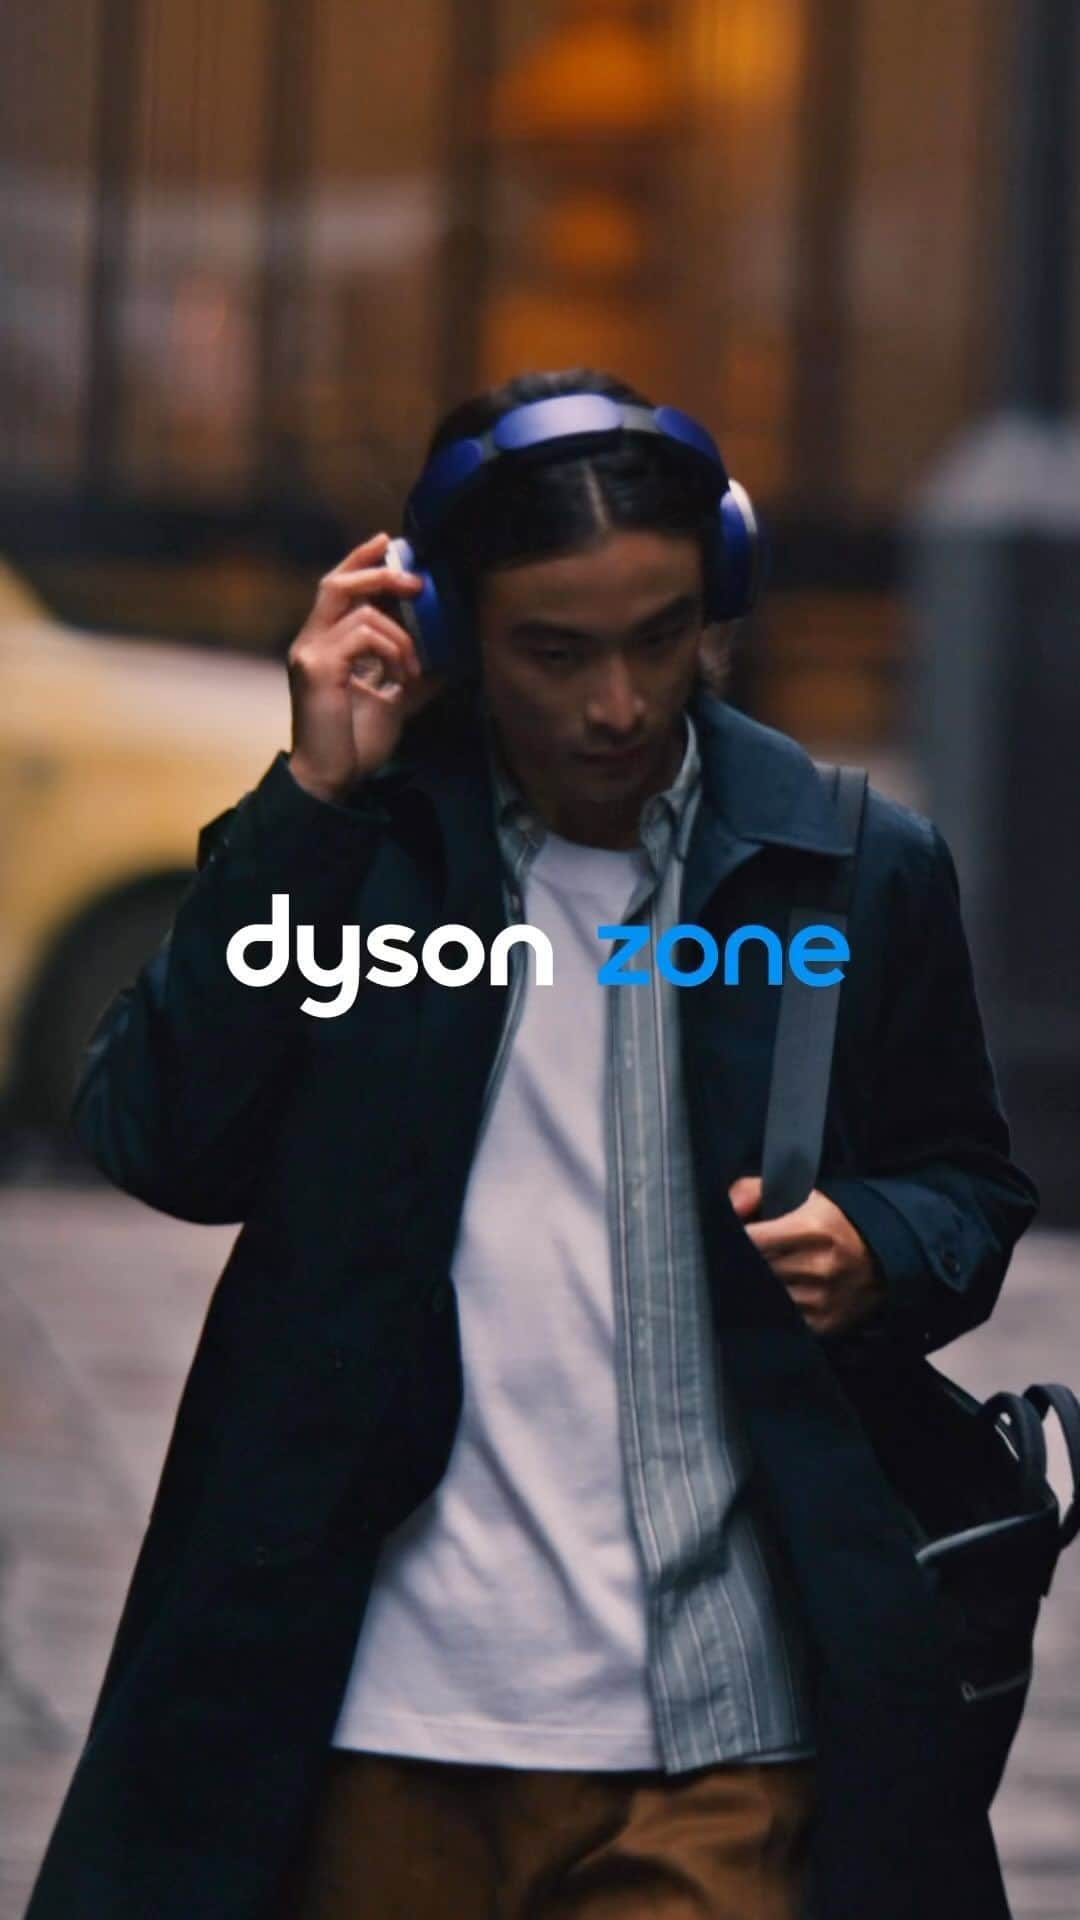 Dysonのインスタグラム：「Sound decision.  Absolute clarity in bass, mids and highs – the Dyson Zone headphones have been scientifically tuned for realistic, detailed audio.  🎶  @theramonaflowers  Listen to the full track ‘Ramona Flowers - Nothing more to worry about’ via link in bio.  #dysonzone #dysonheadphones #pureaudio #dysontechnology」